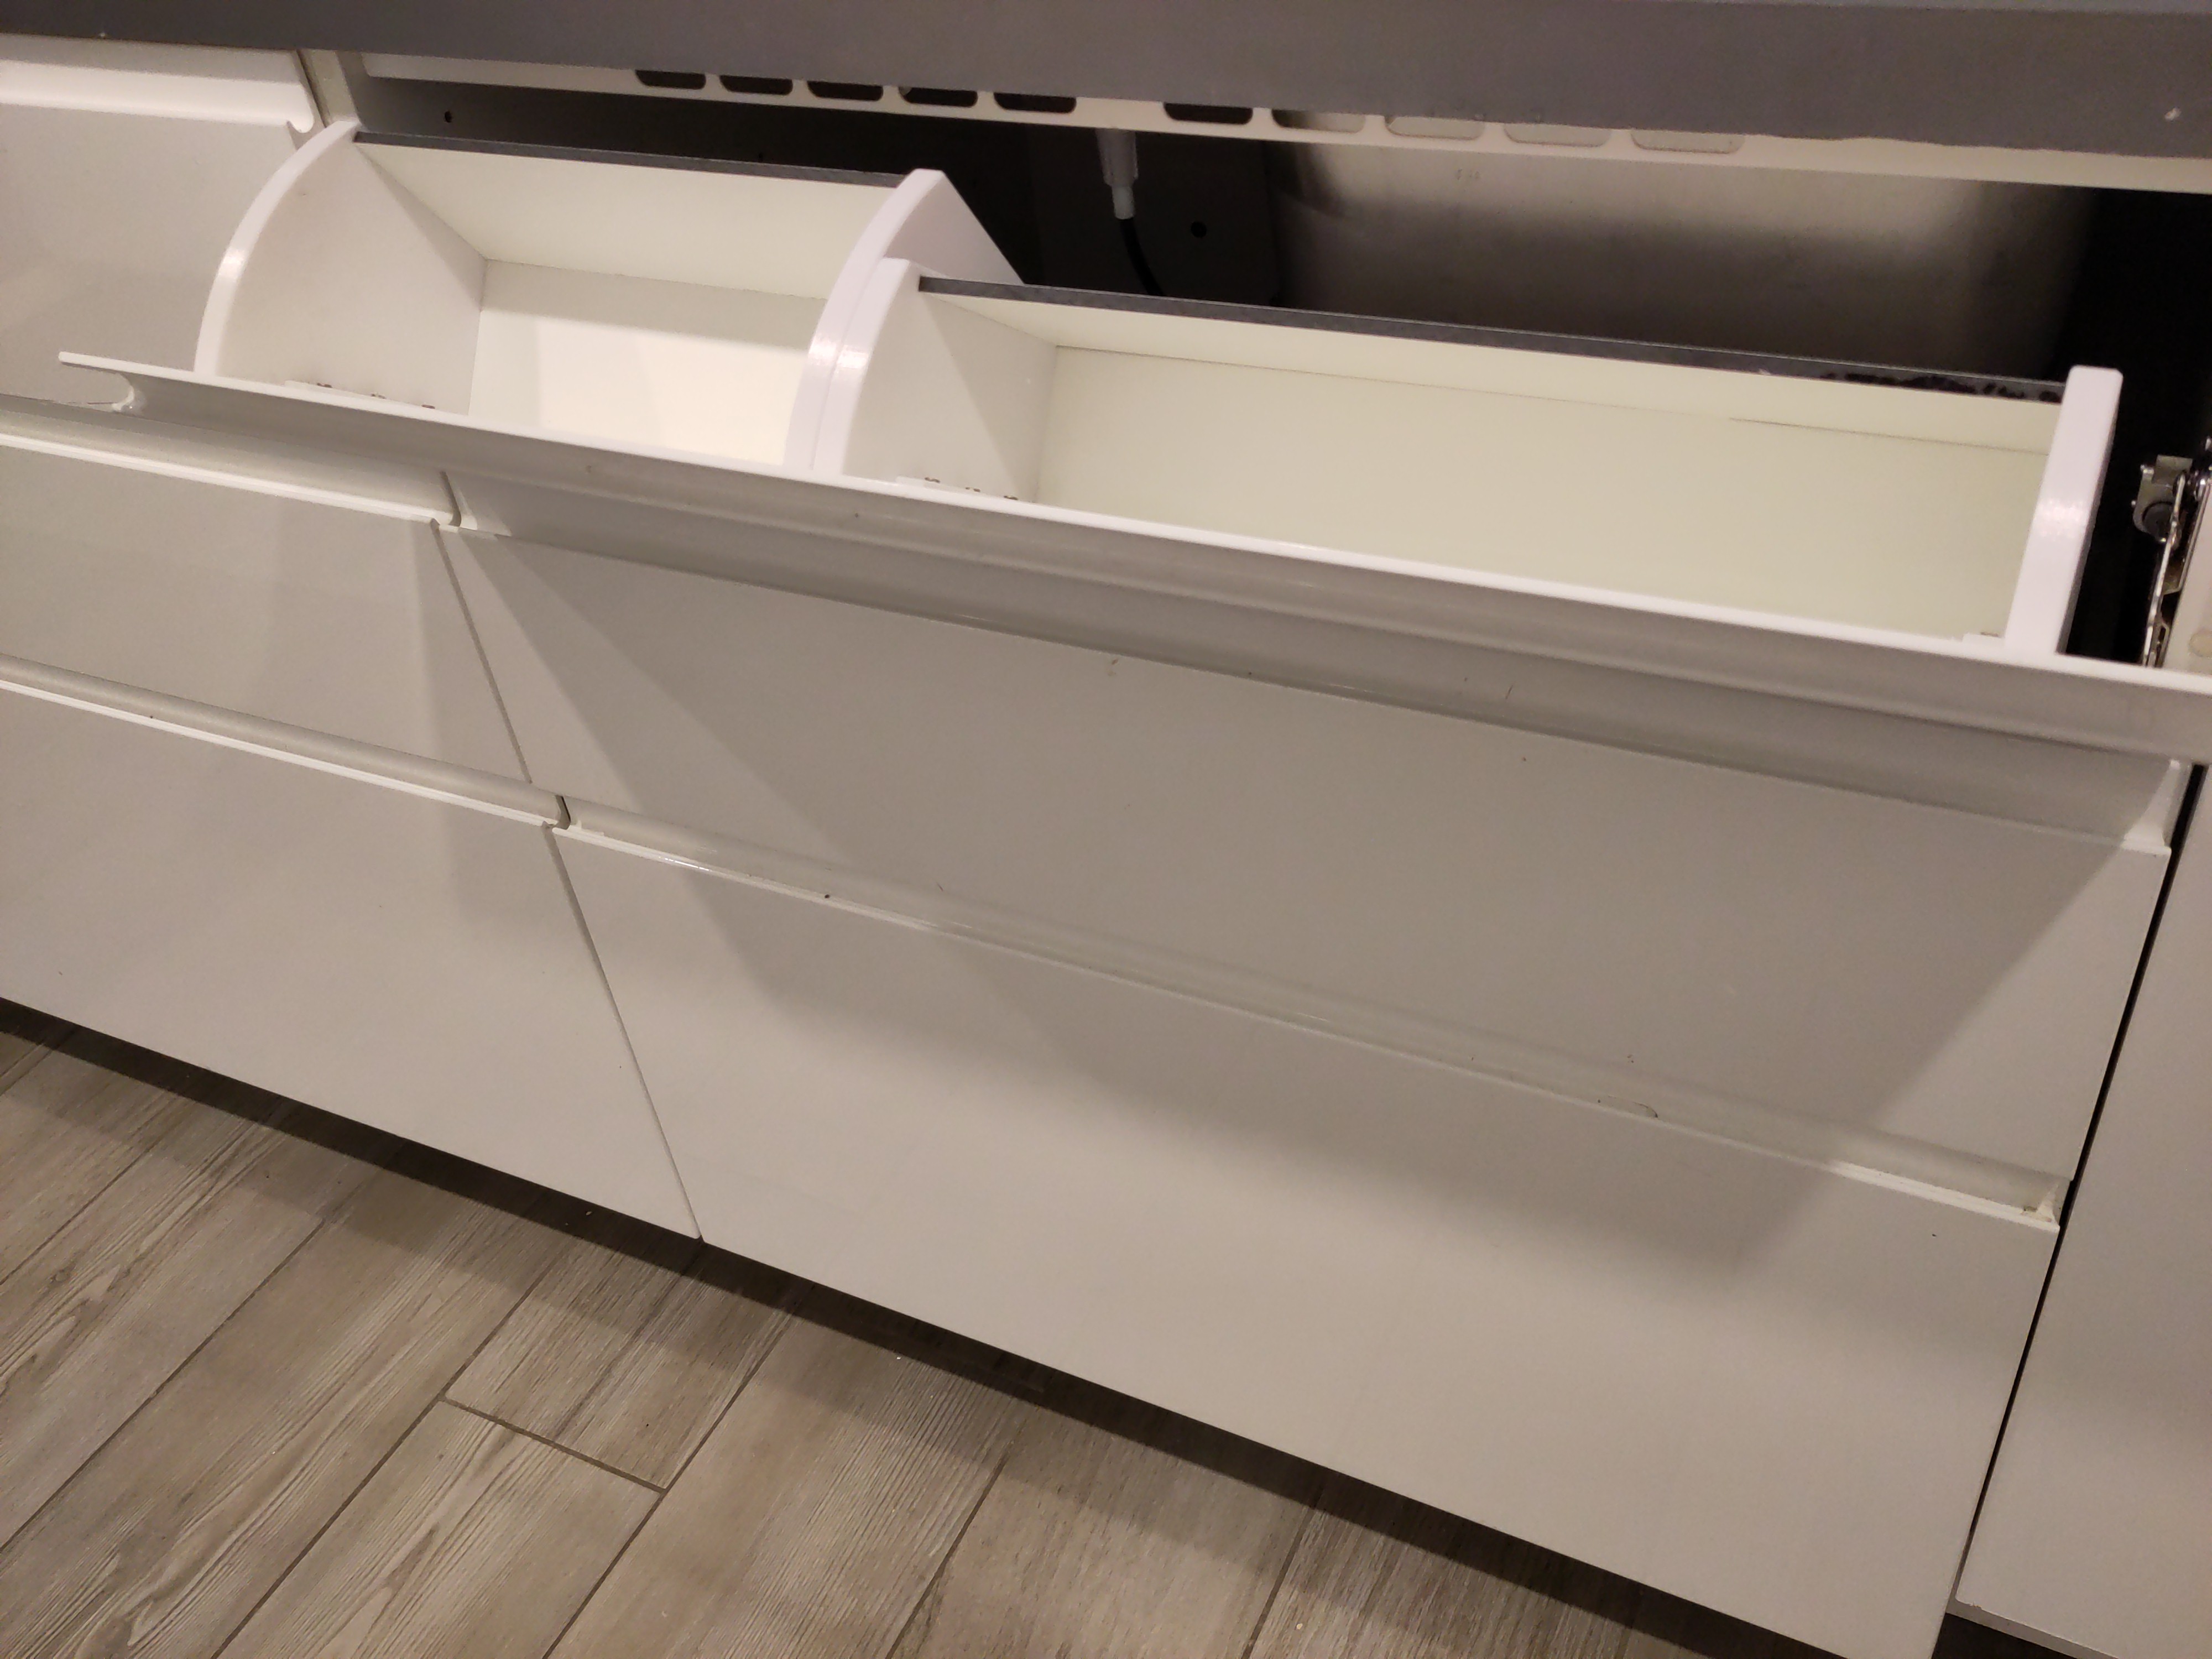 Tray for tilt-down drawers